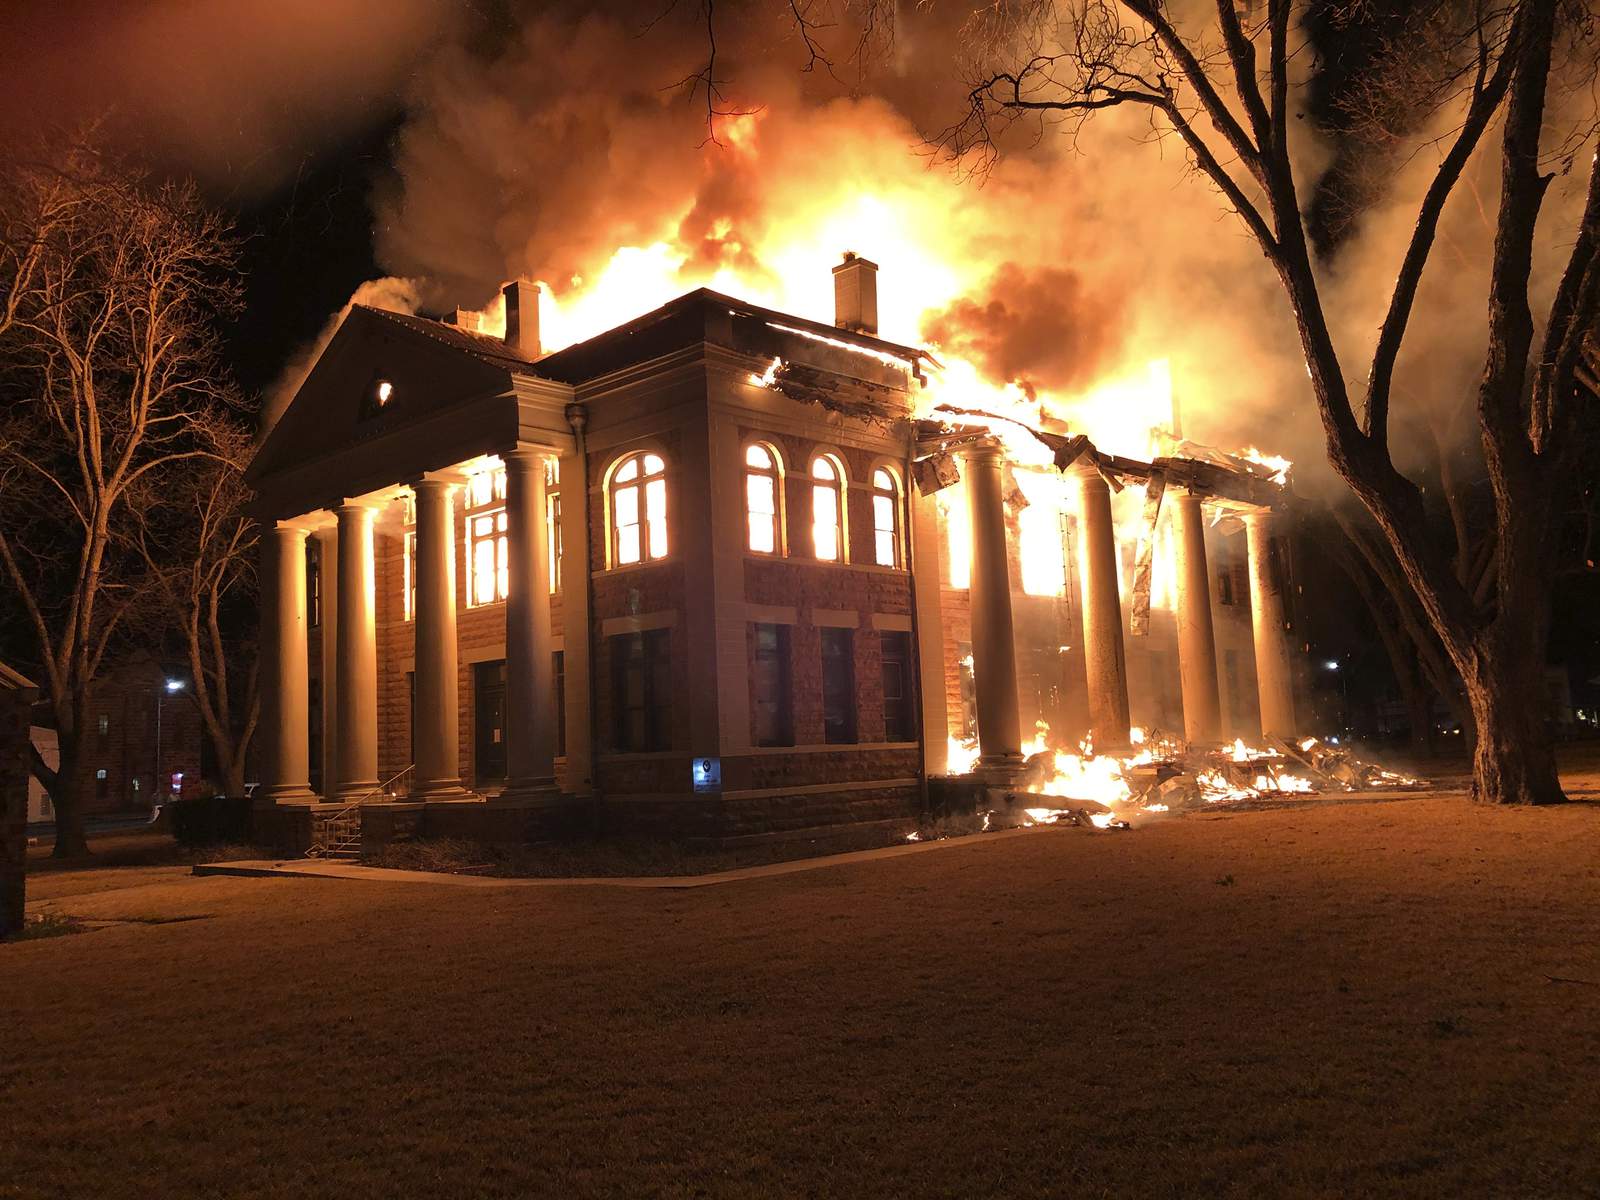 Arson suspected in massive fire at 111-year-old Mason County courthouse; 1 arrested